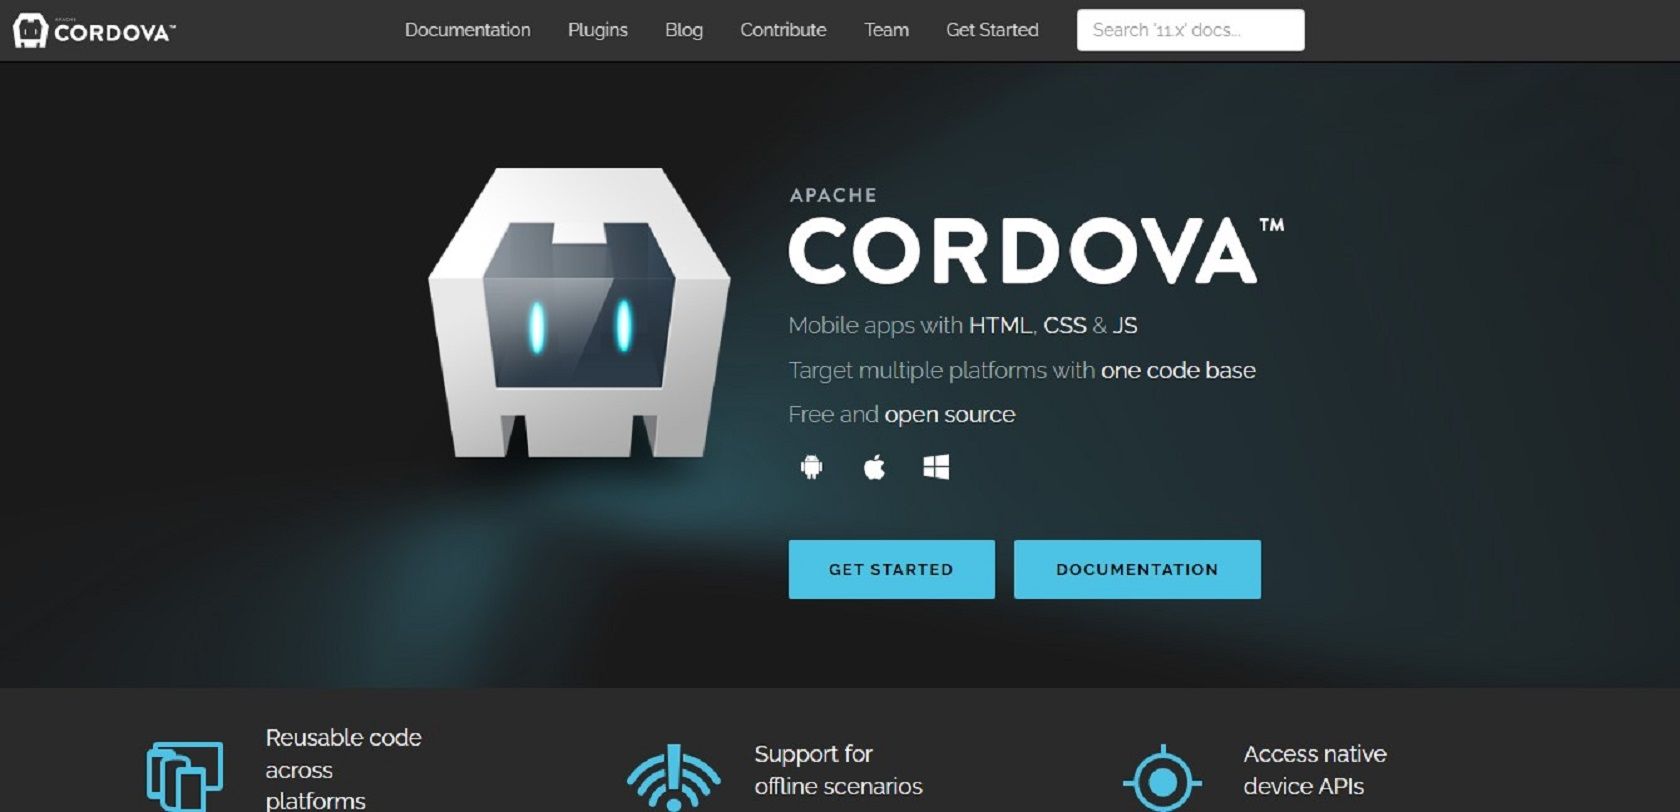 Getting Started with Apache Cordova